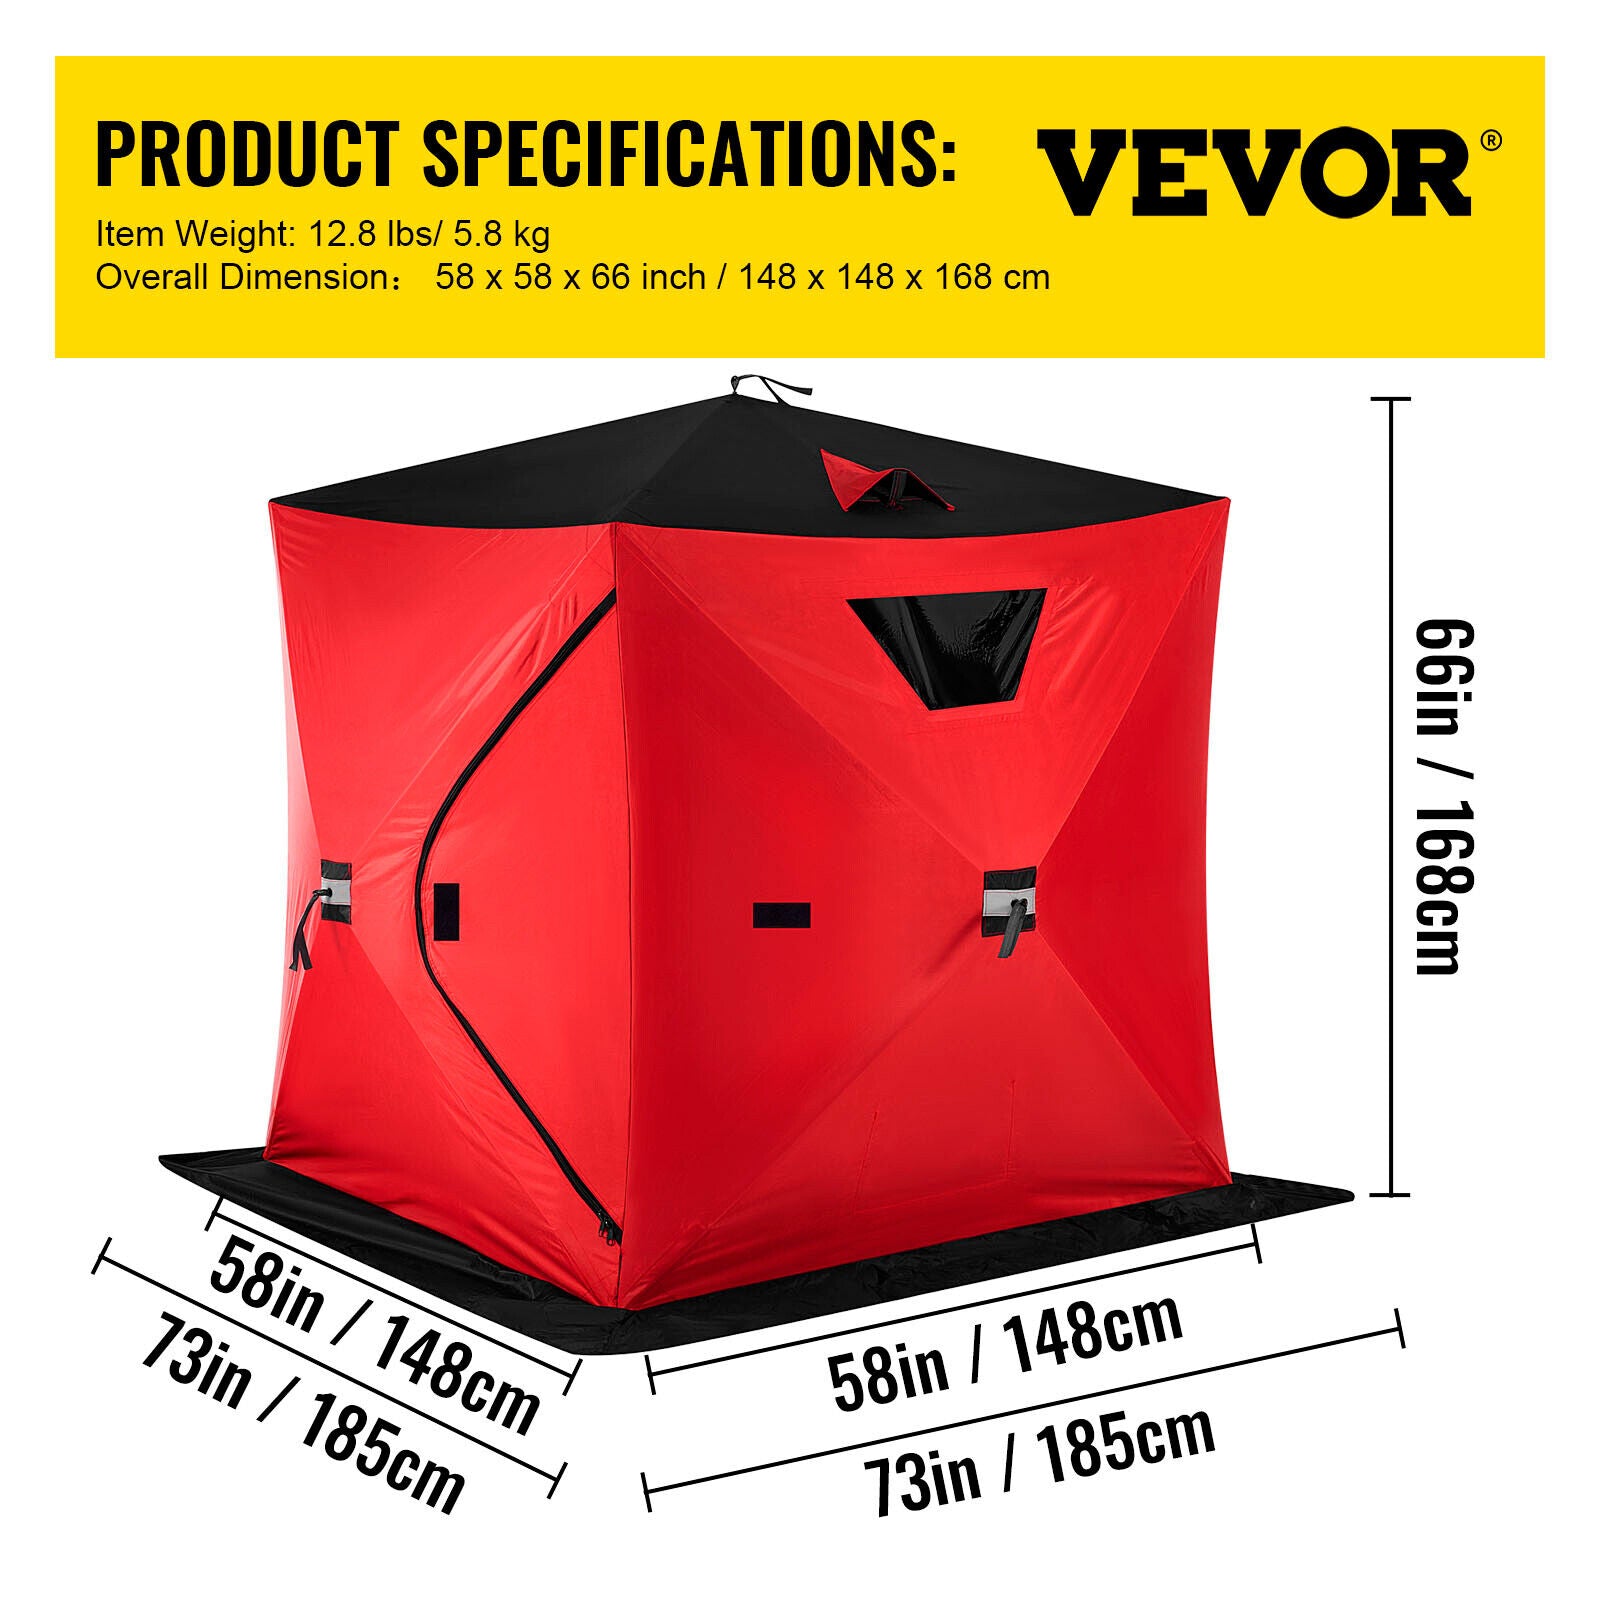 VEVOR 2 person Ice Fishing Shelter, Pop-Up Portable Insulated Ice Fishing  Tent , Waterproof Oxford Fabric 